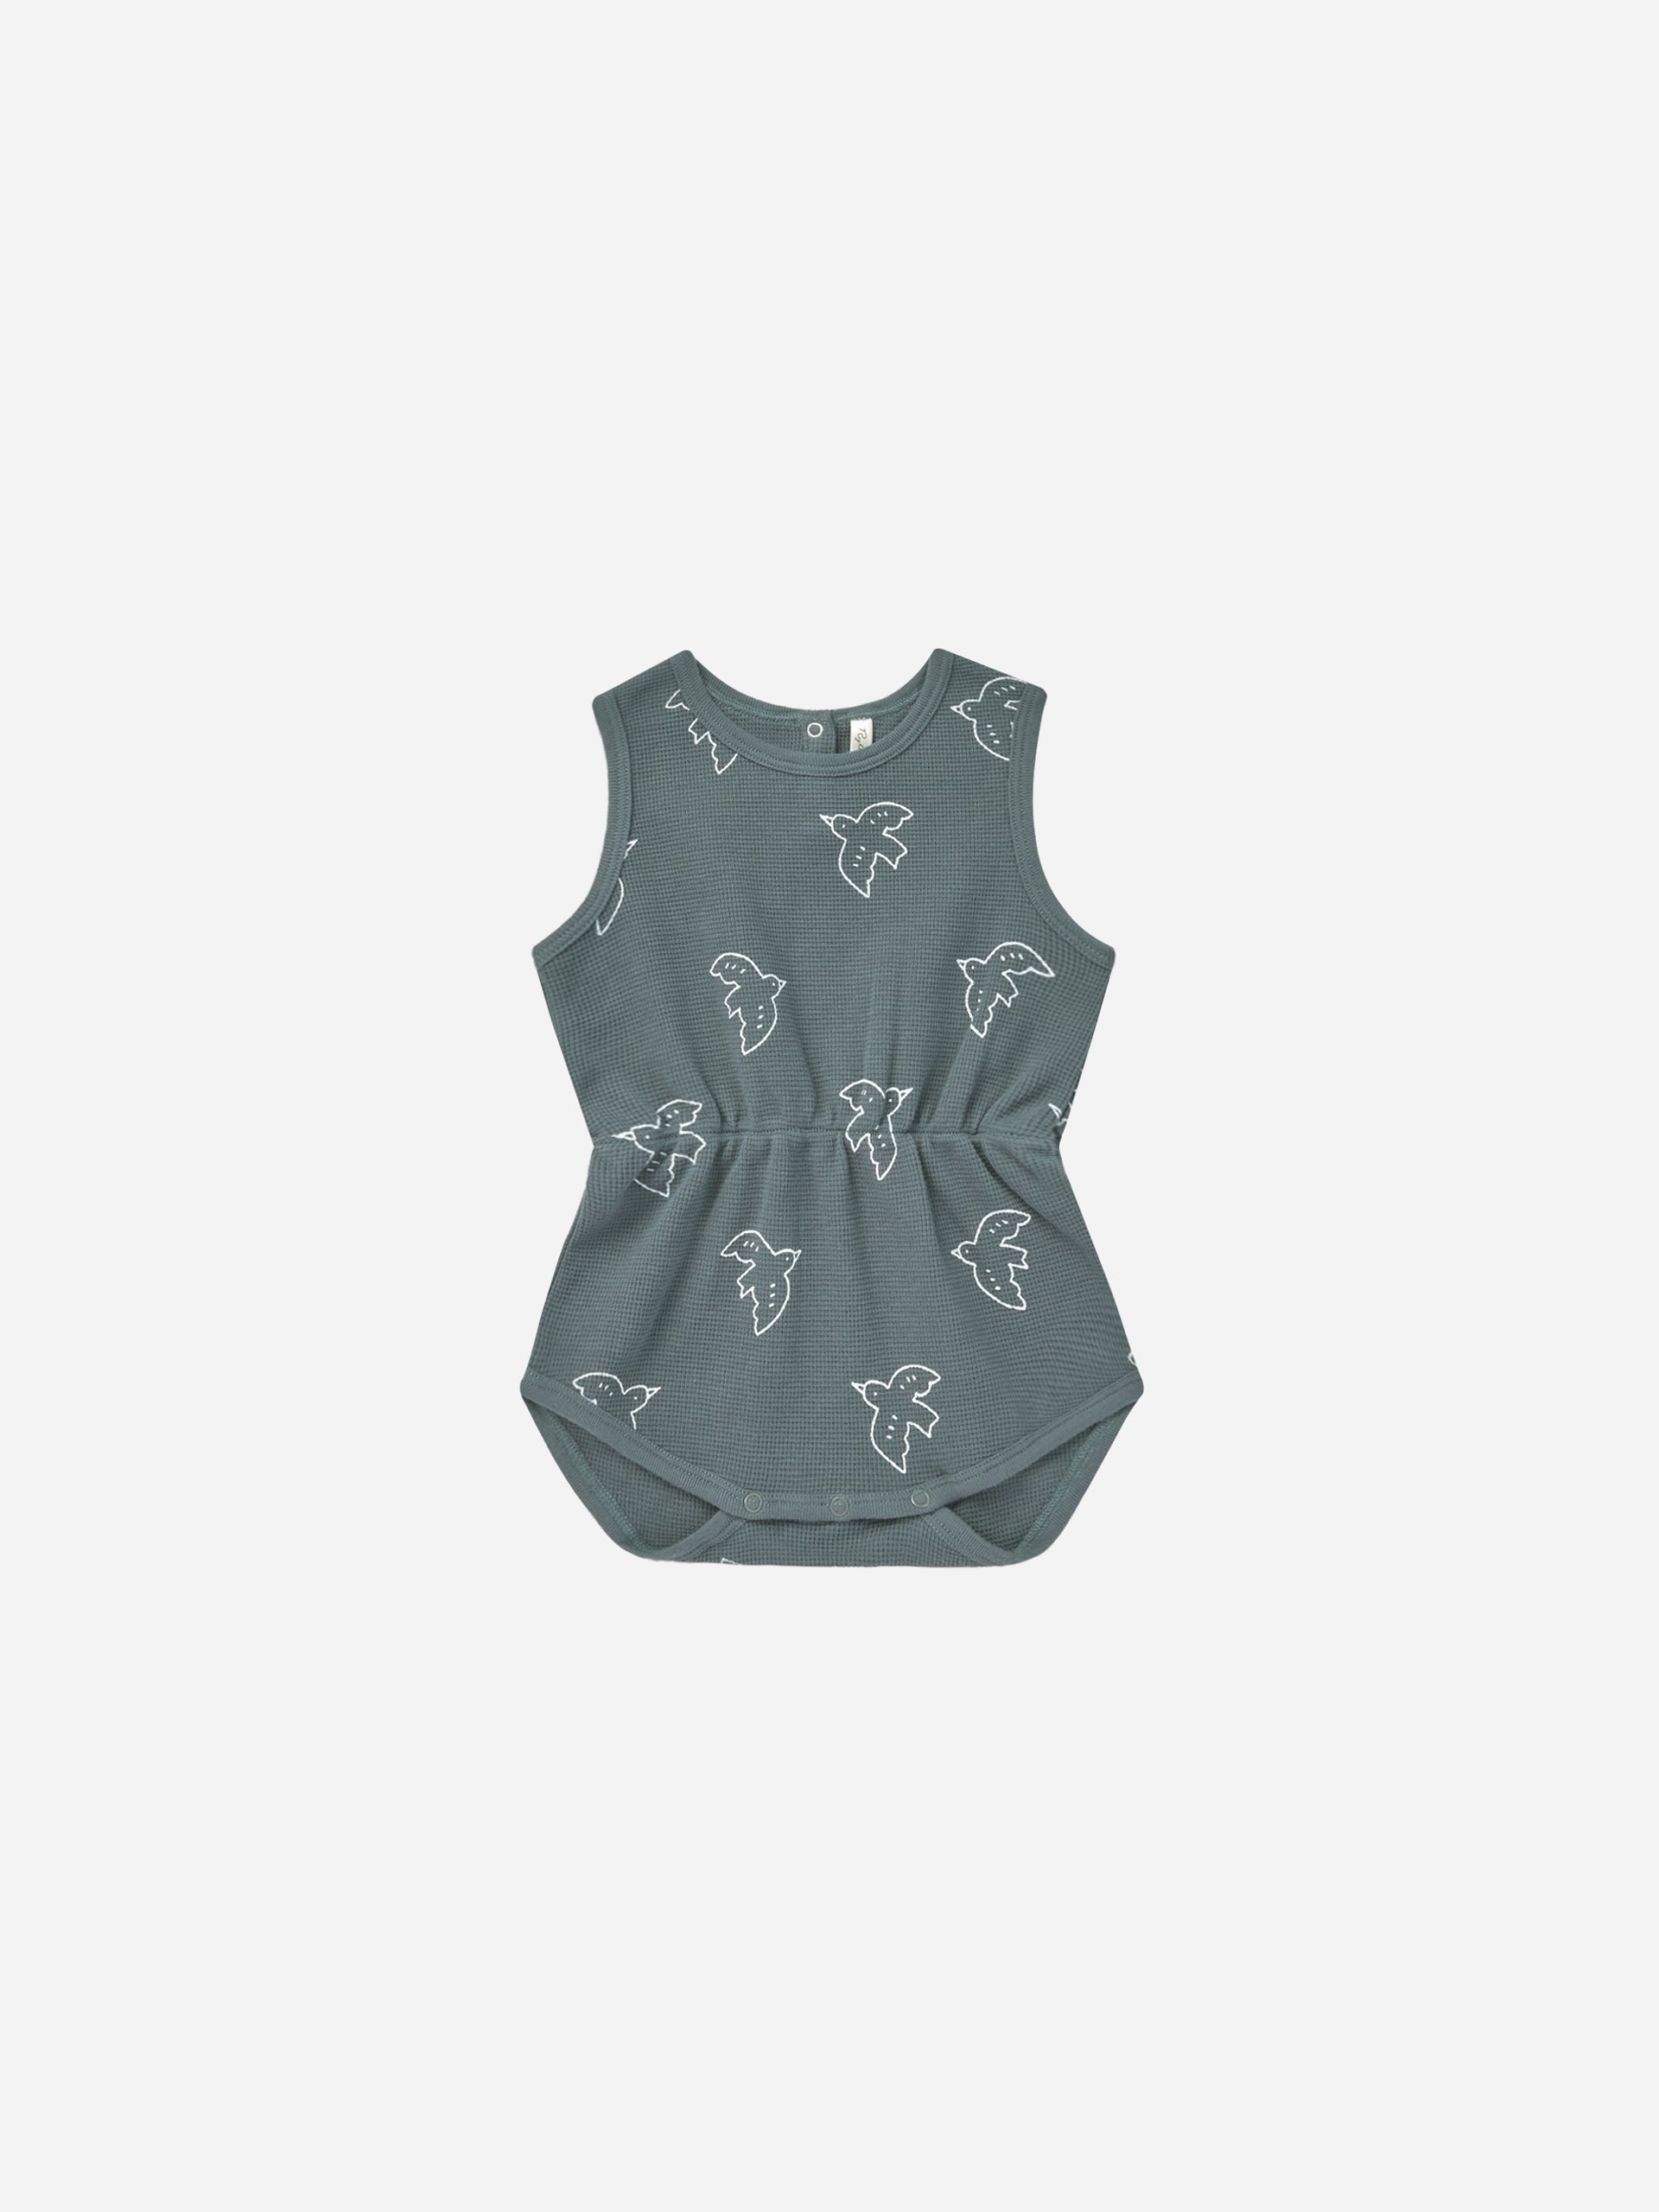 Cinch Playsuit || Birds - Rylee + Cru | Kids Clothes | Trendy Baby Clothes | Modern Infant Outfits |